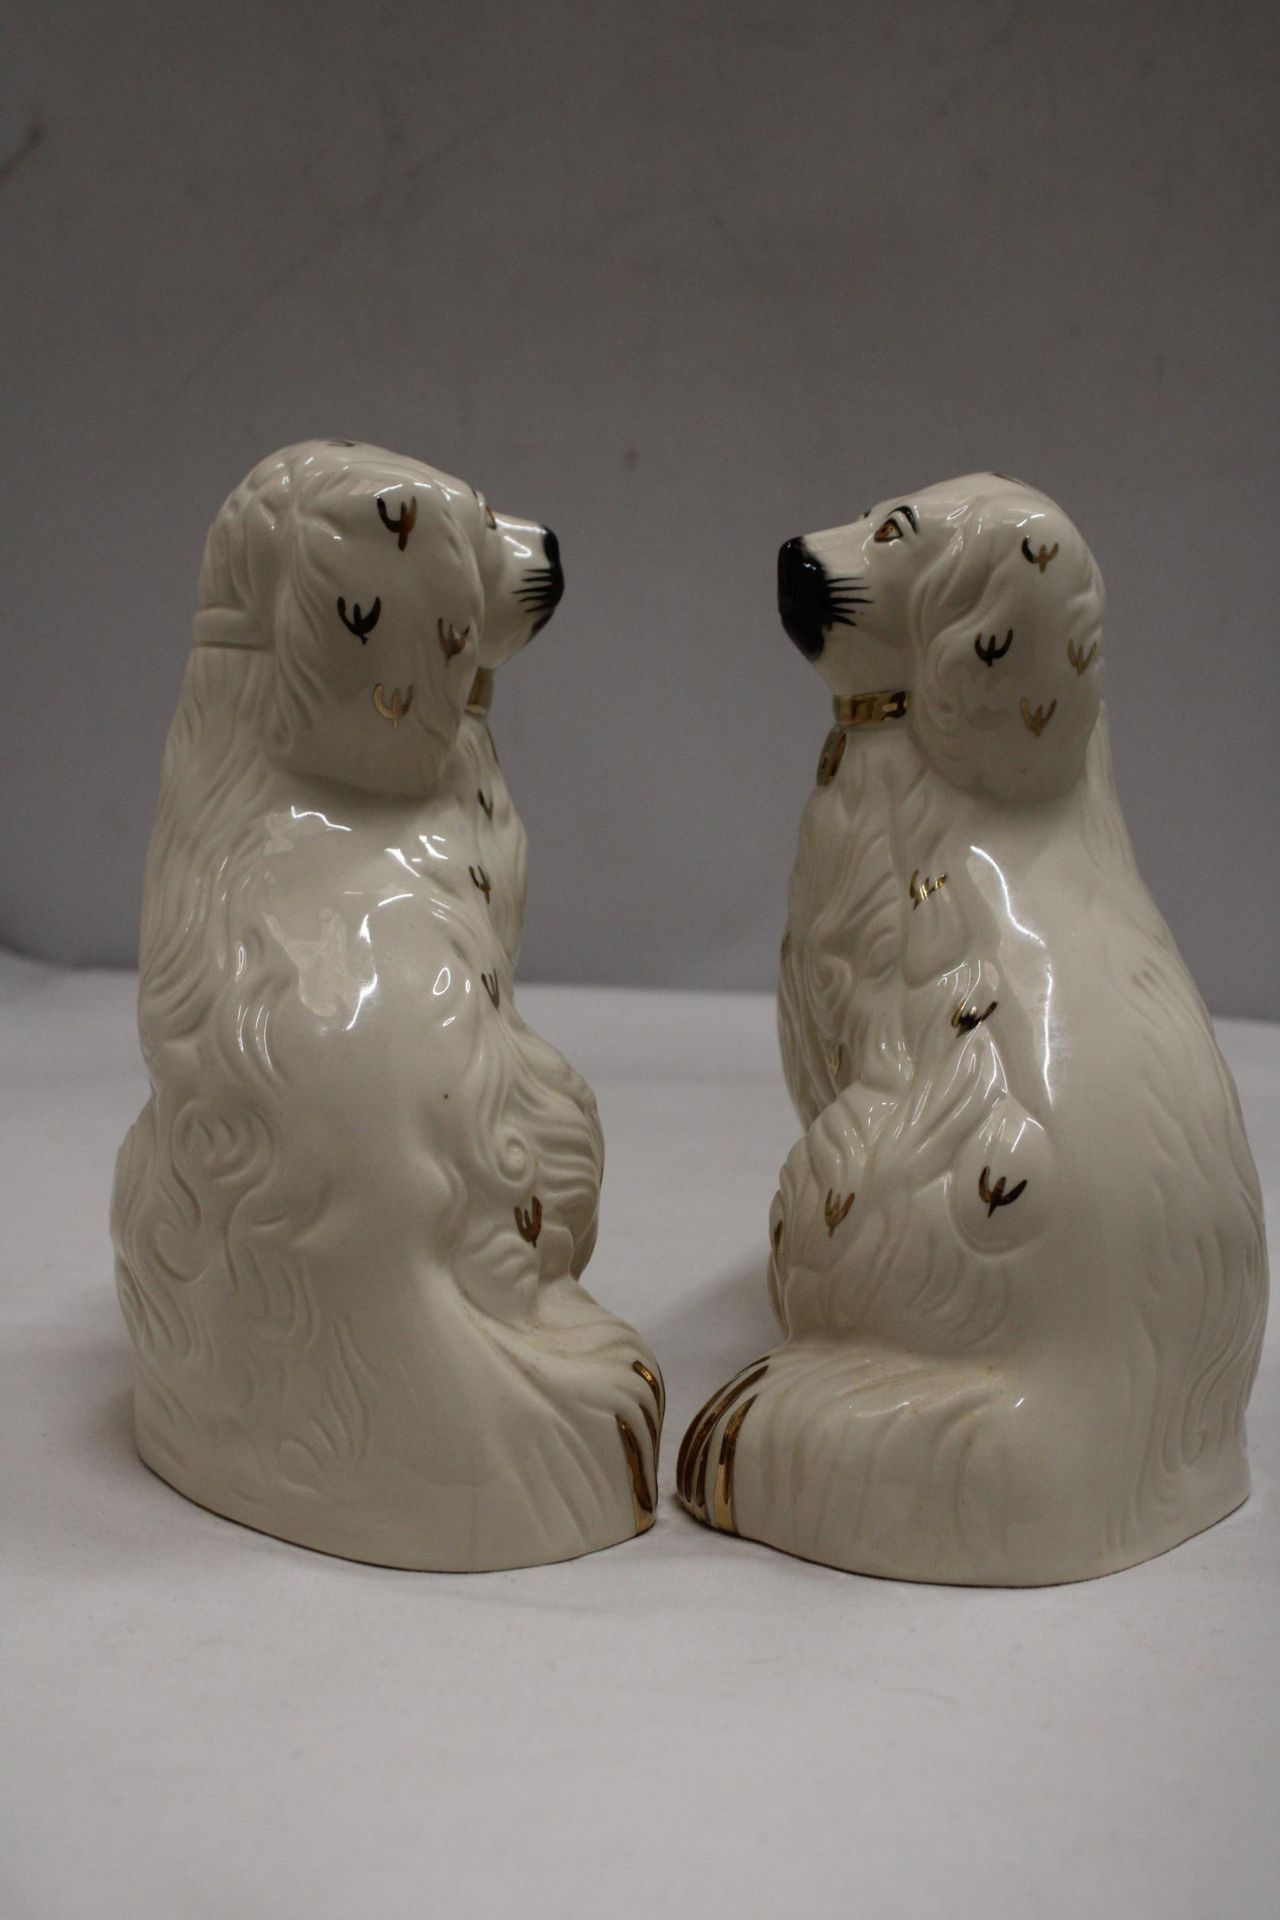 A LARGE SIZED PAIR OF ROYAL DOULTON SPANIEL DOGS IN ORIGINAL BOX - Image 5 of 6